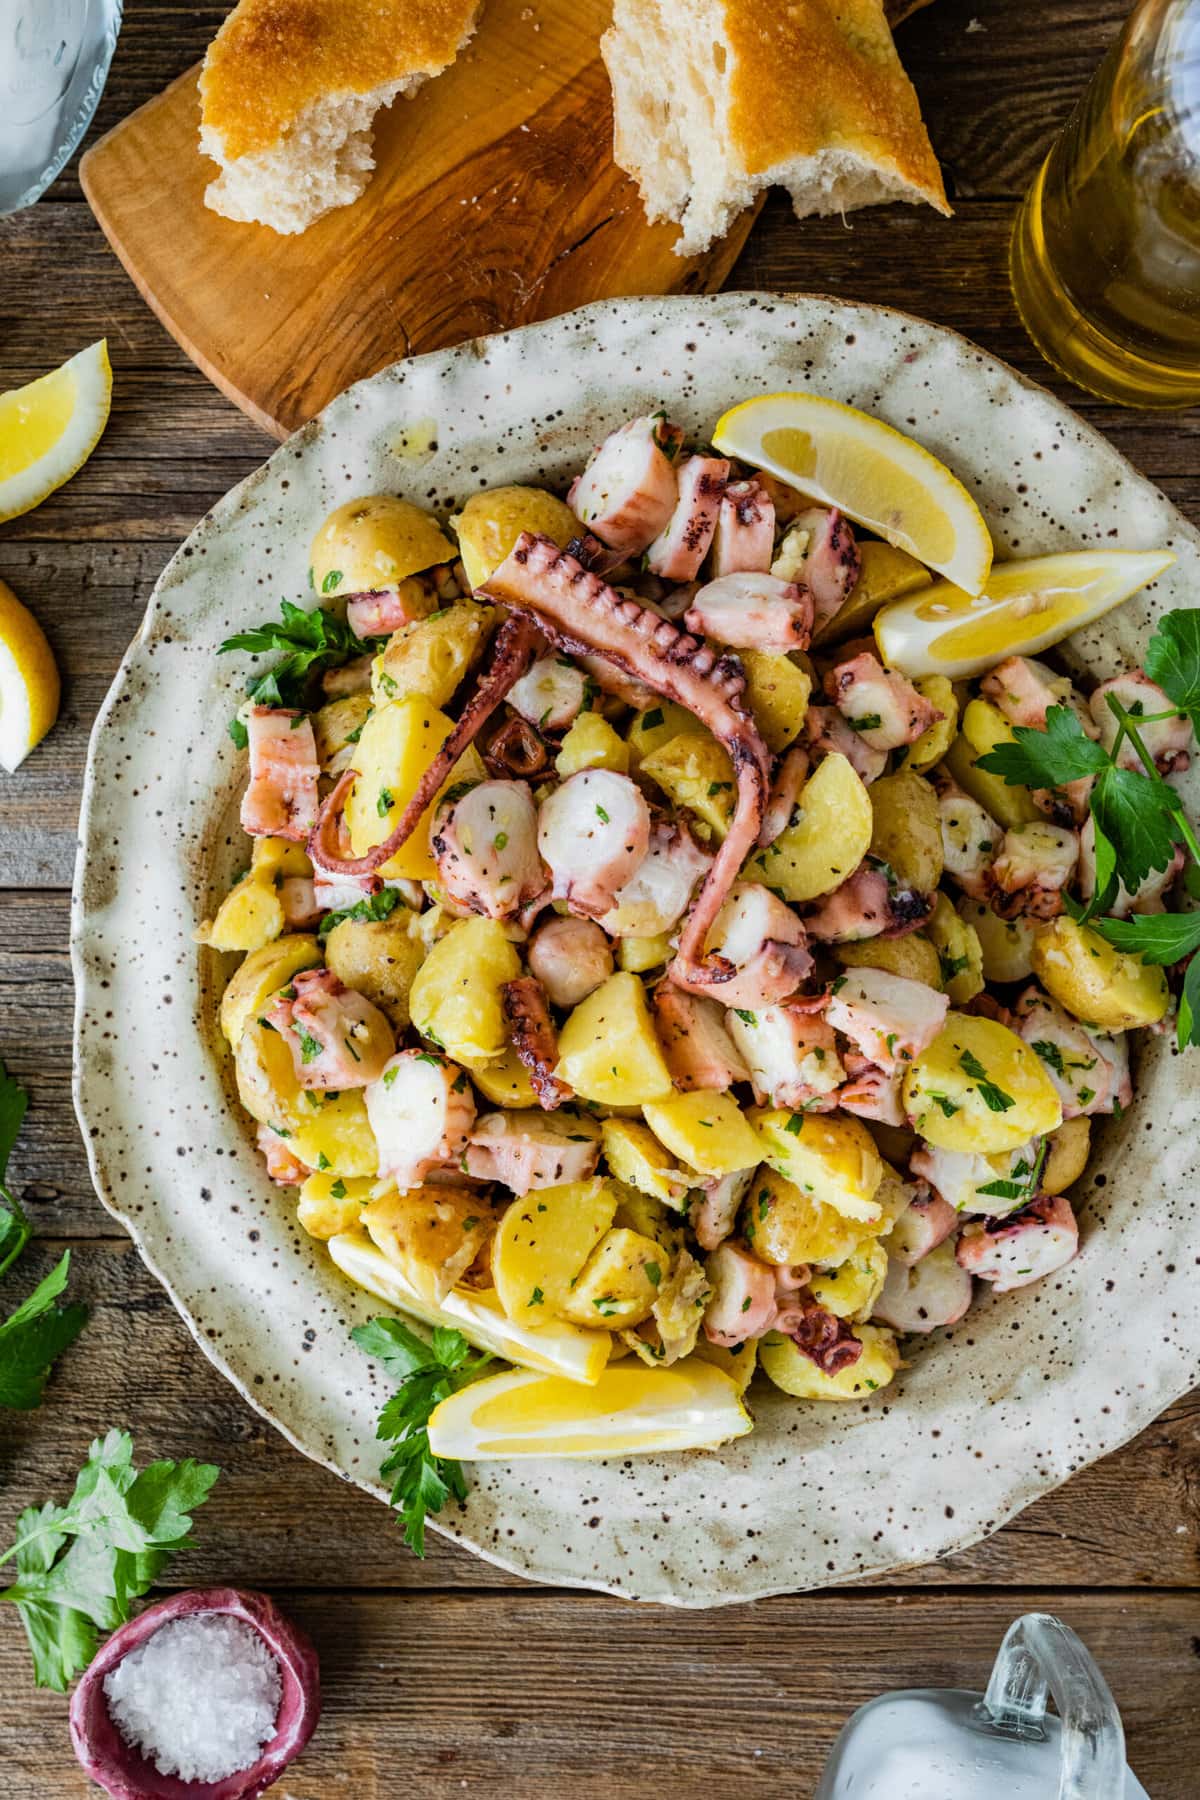 Italian Octopus Salad Recipe with Potatoes (Insalata Di Polpo) in a large round serving platter. Side of lemon, parley on top, and bread as a side. 